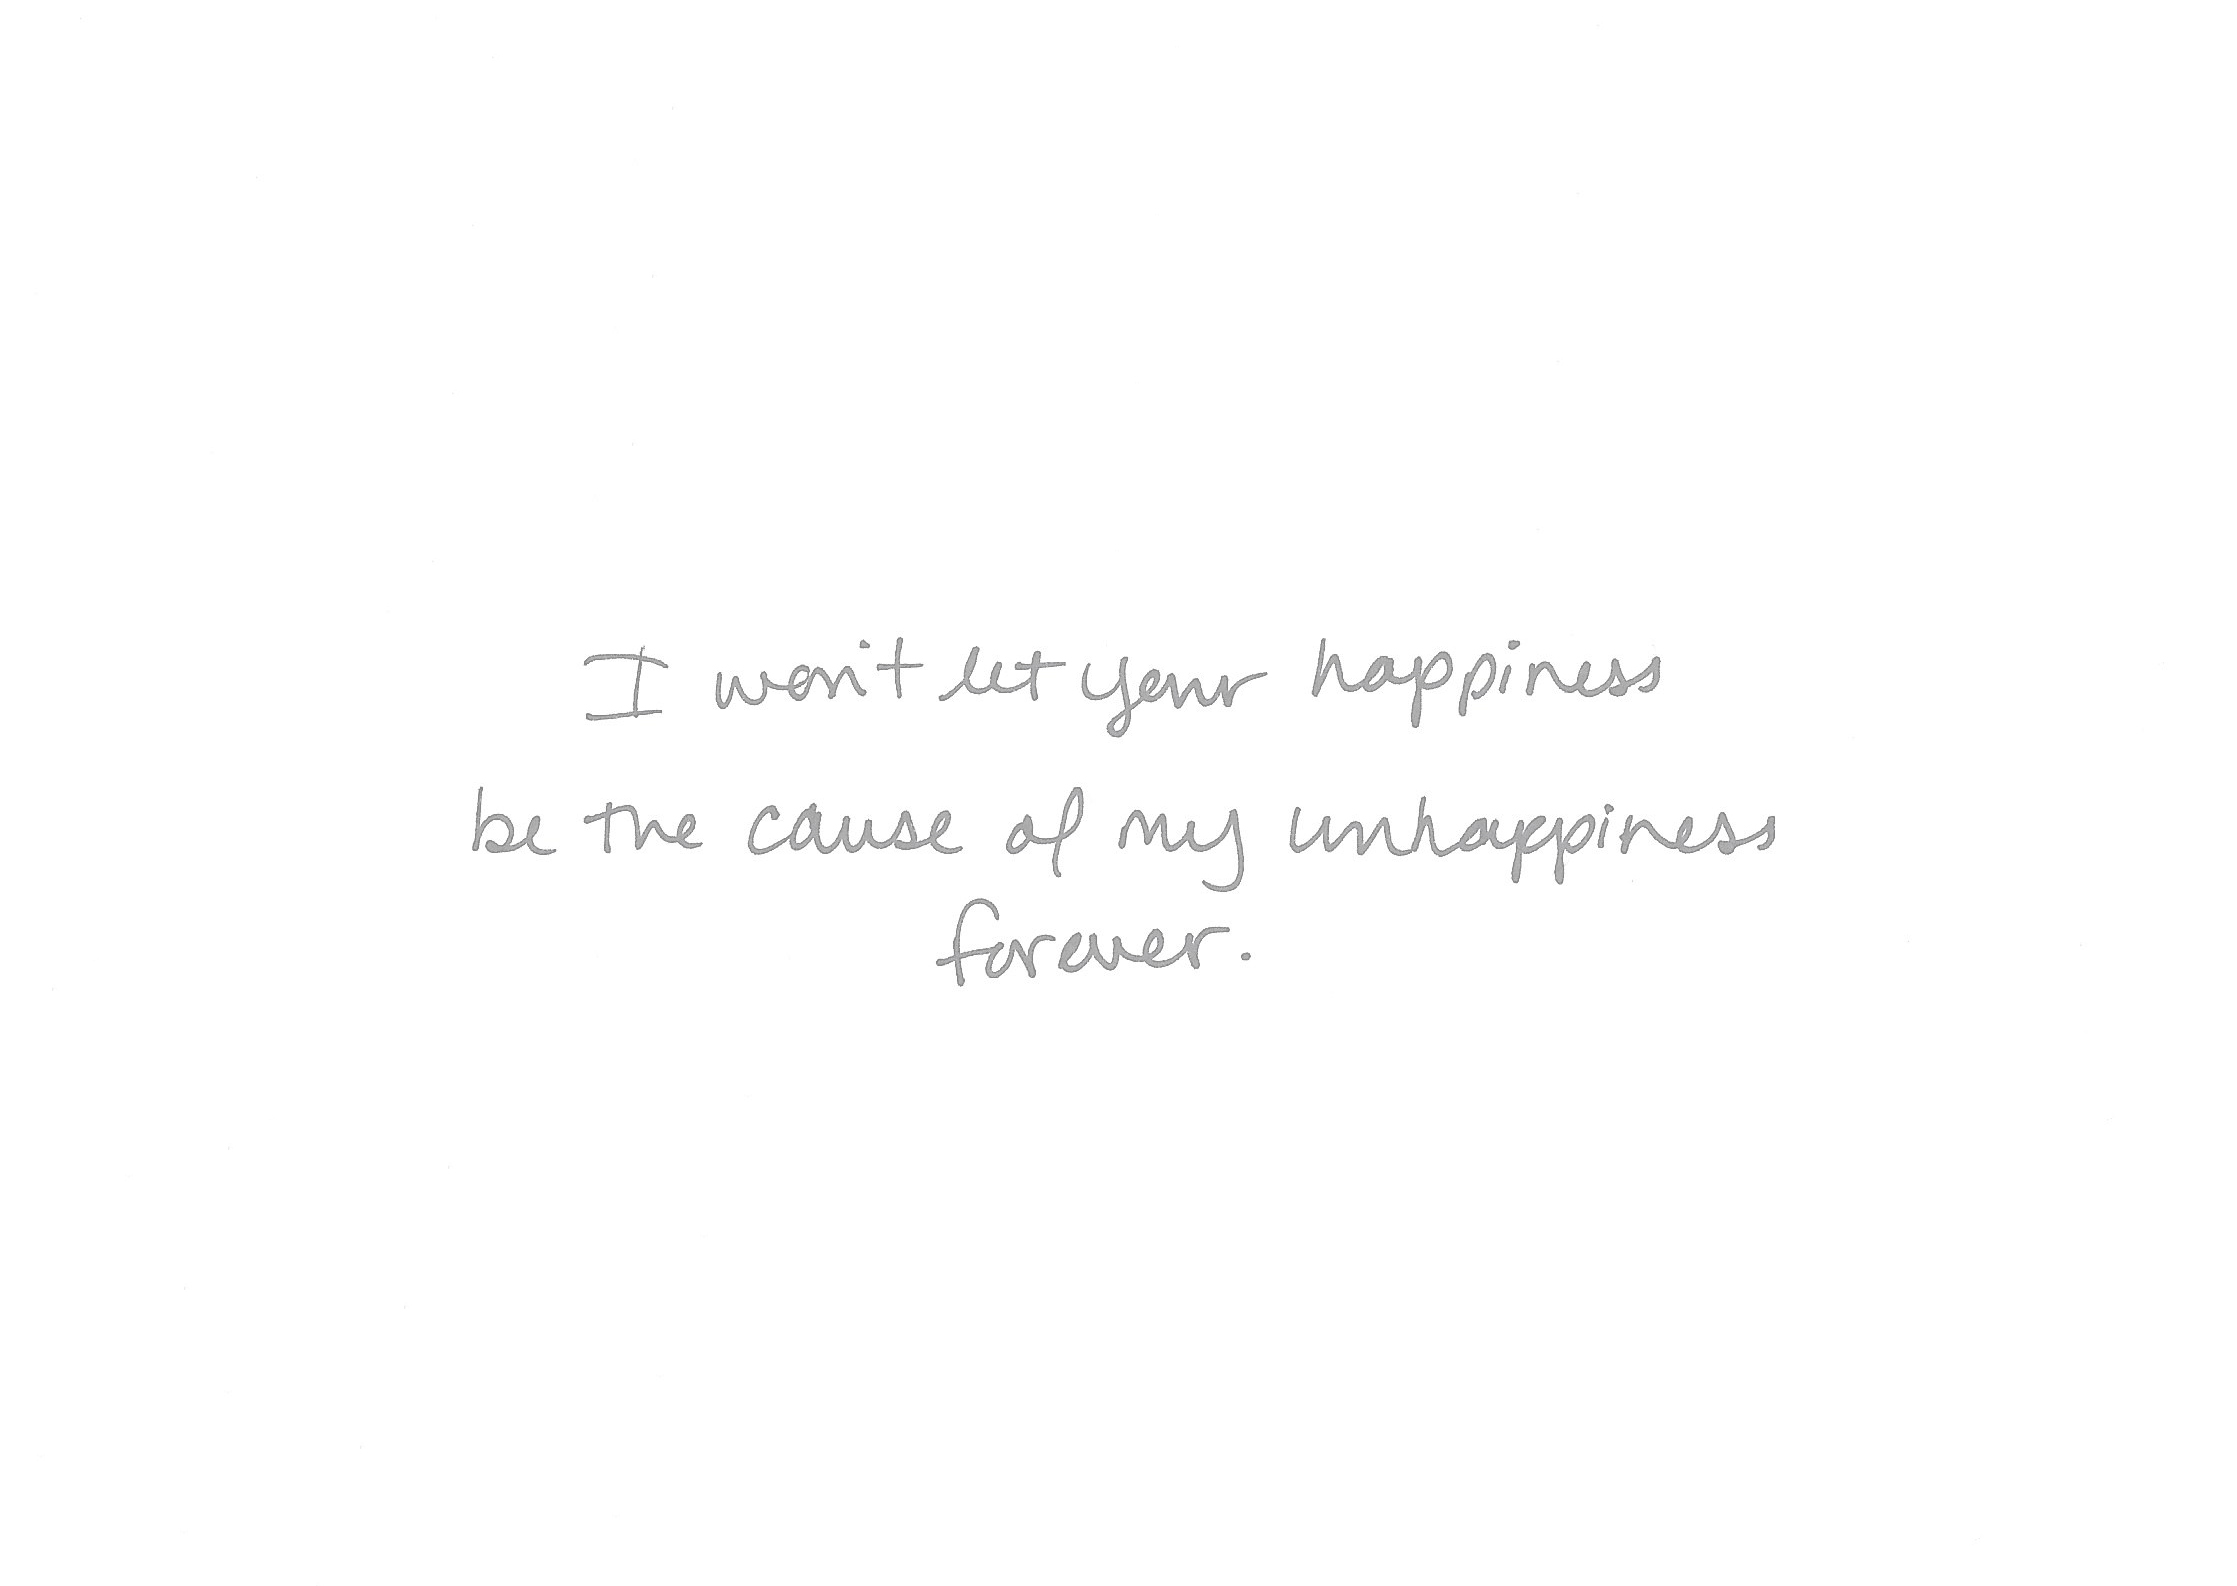 i won't let your unhappiness.jpg